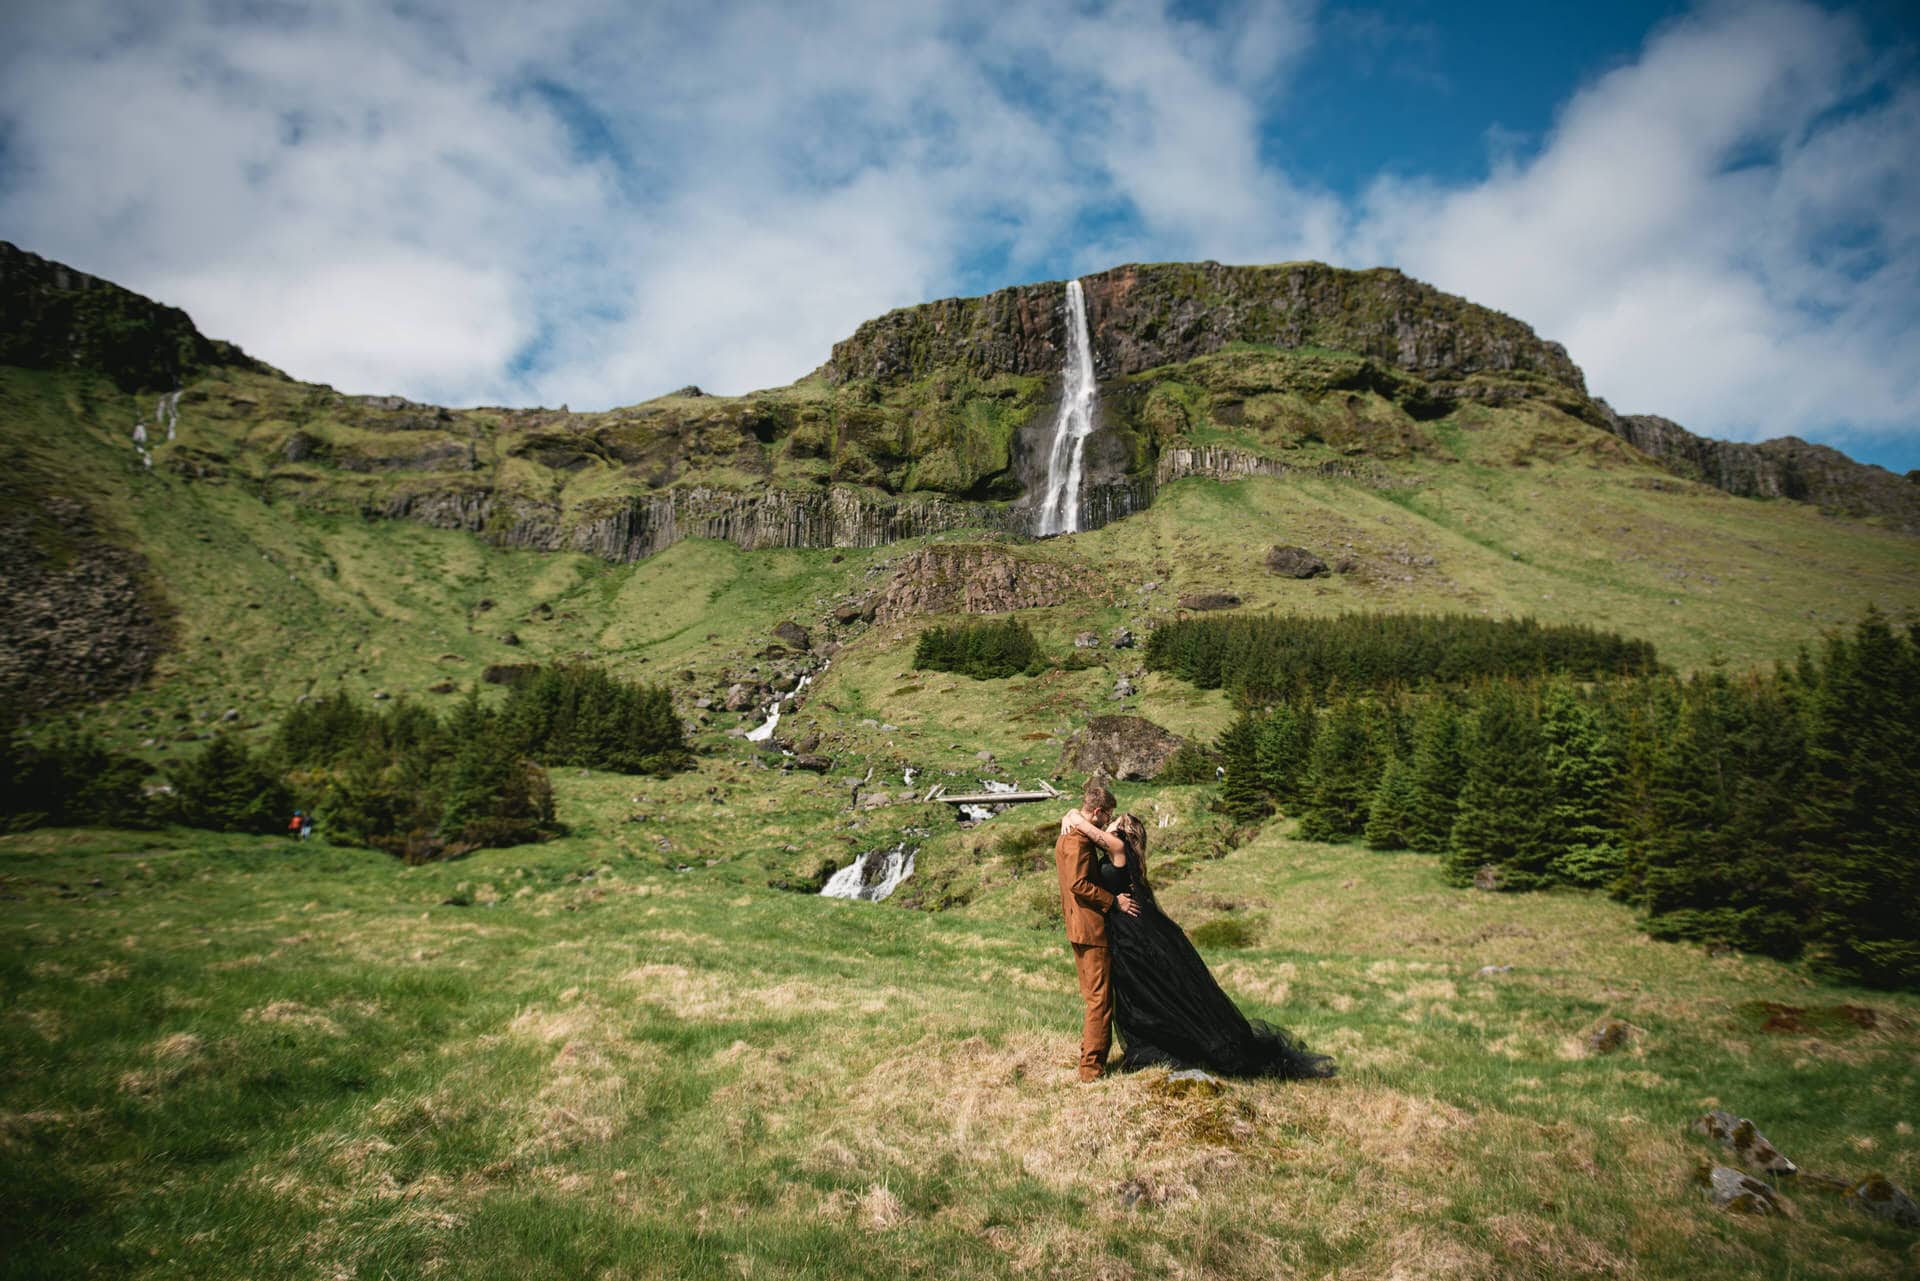 Groom's warm embrace envelops the bride in the heart of the Icelandic wilderness.